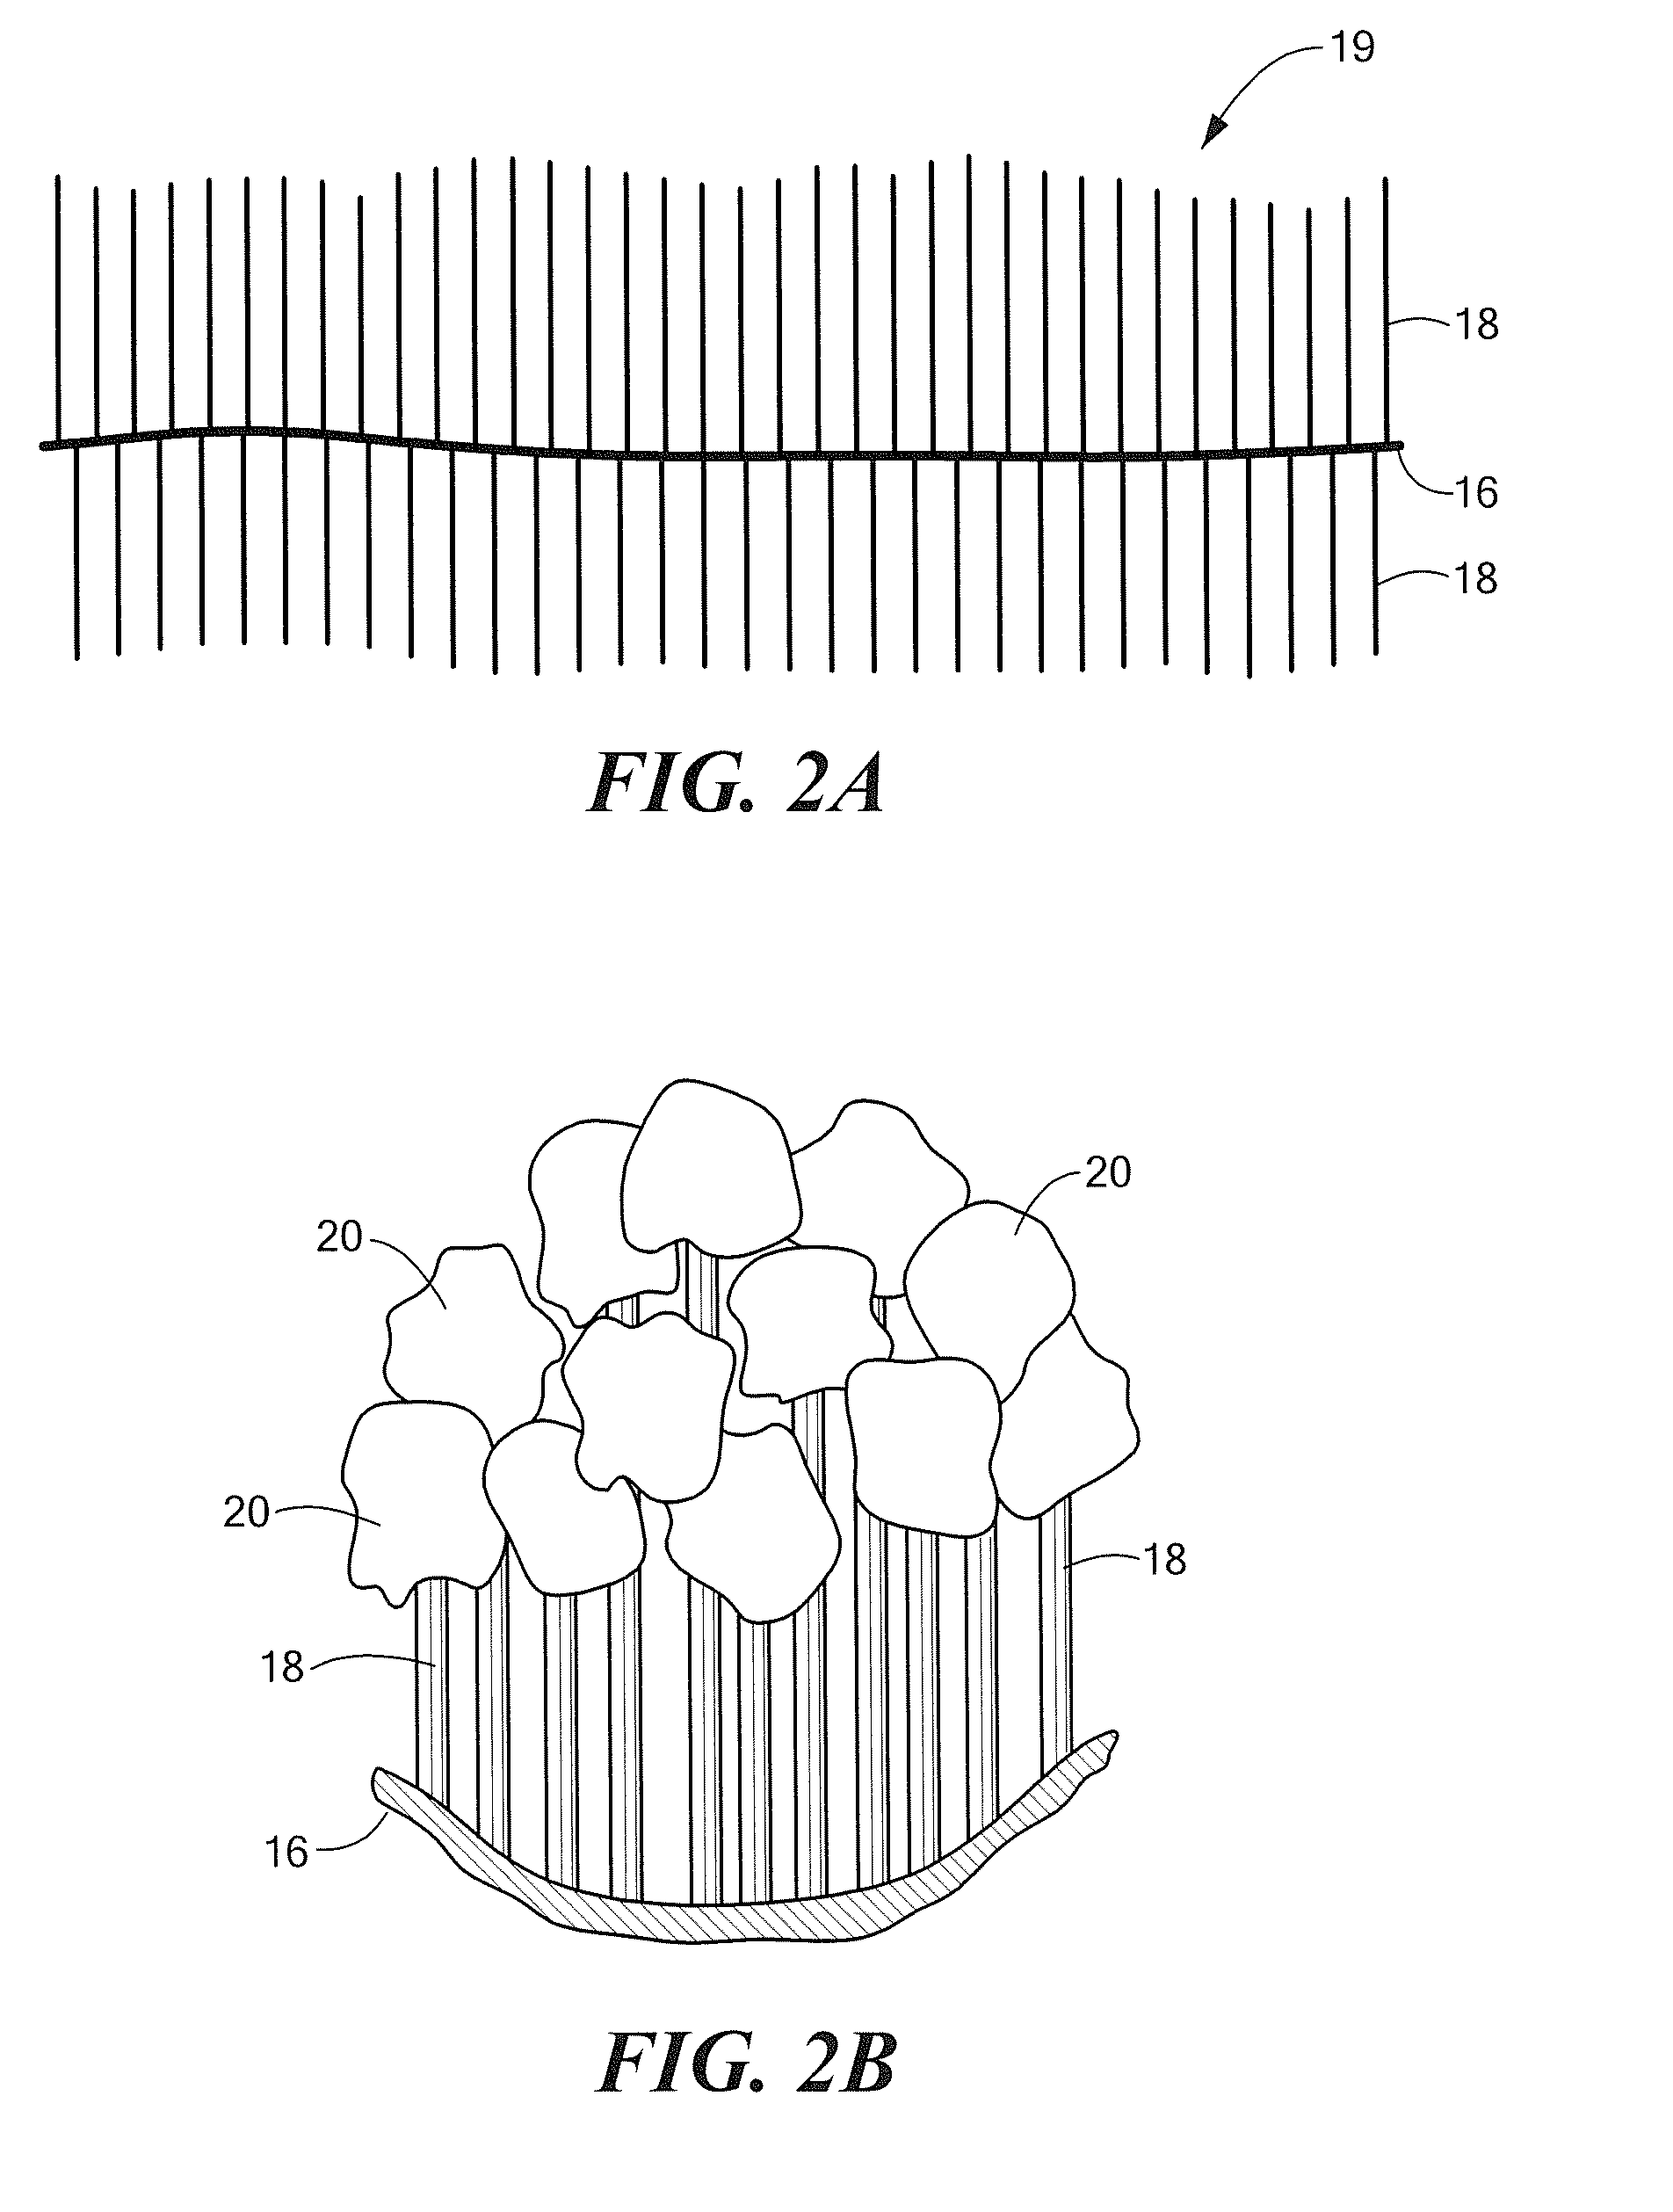 Nano-tube thermal interface structure